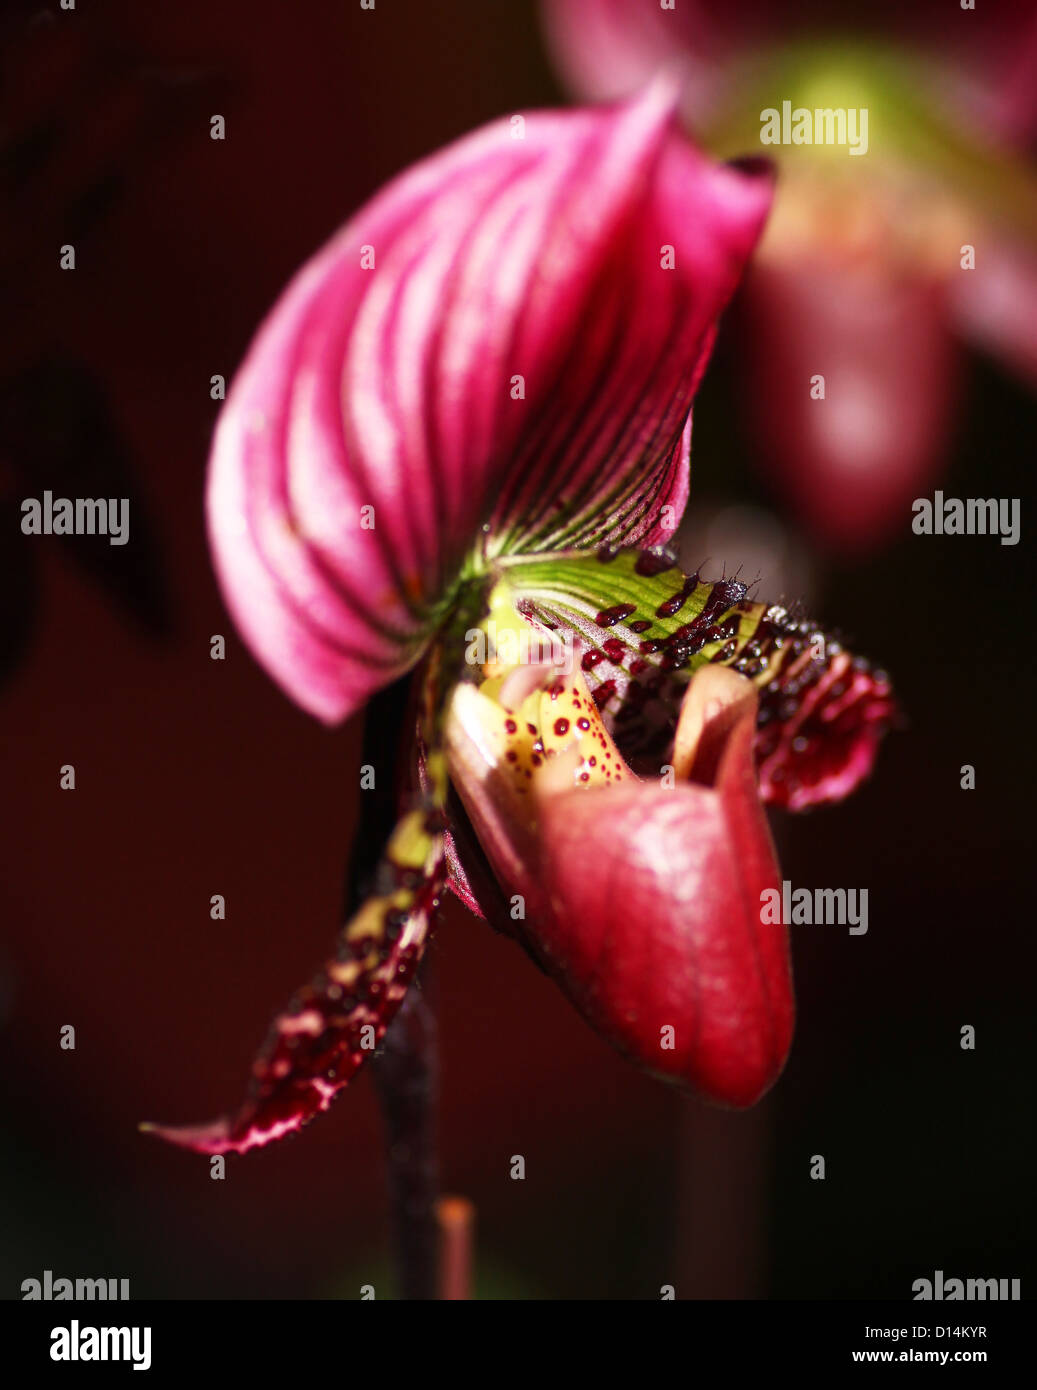 Paphiopedilum Hung Sheng 'Red Apple' Slipper Orchid flower Stock Photo